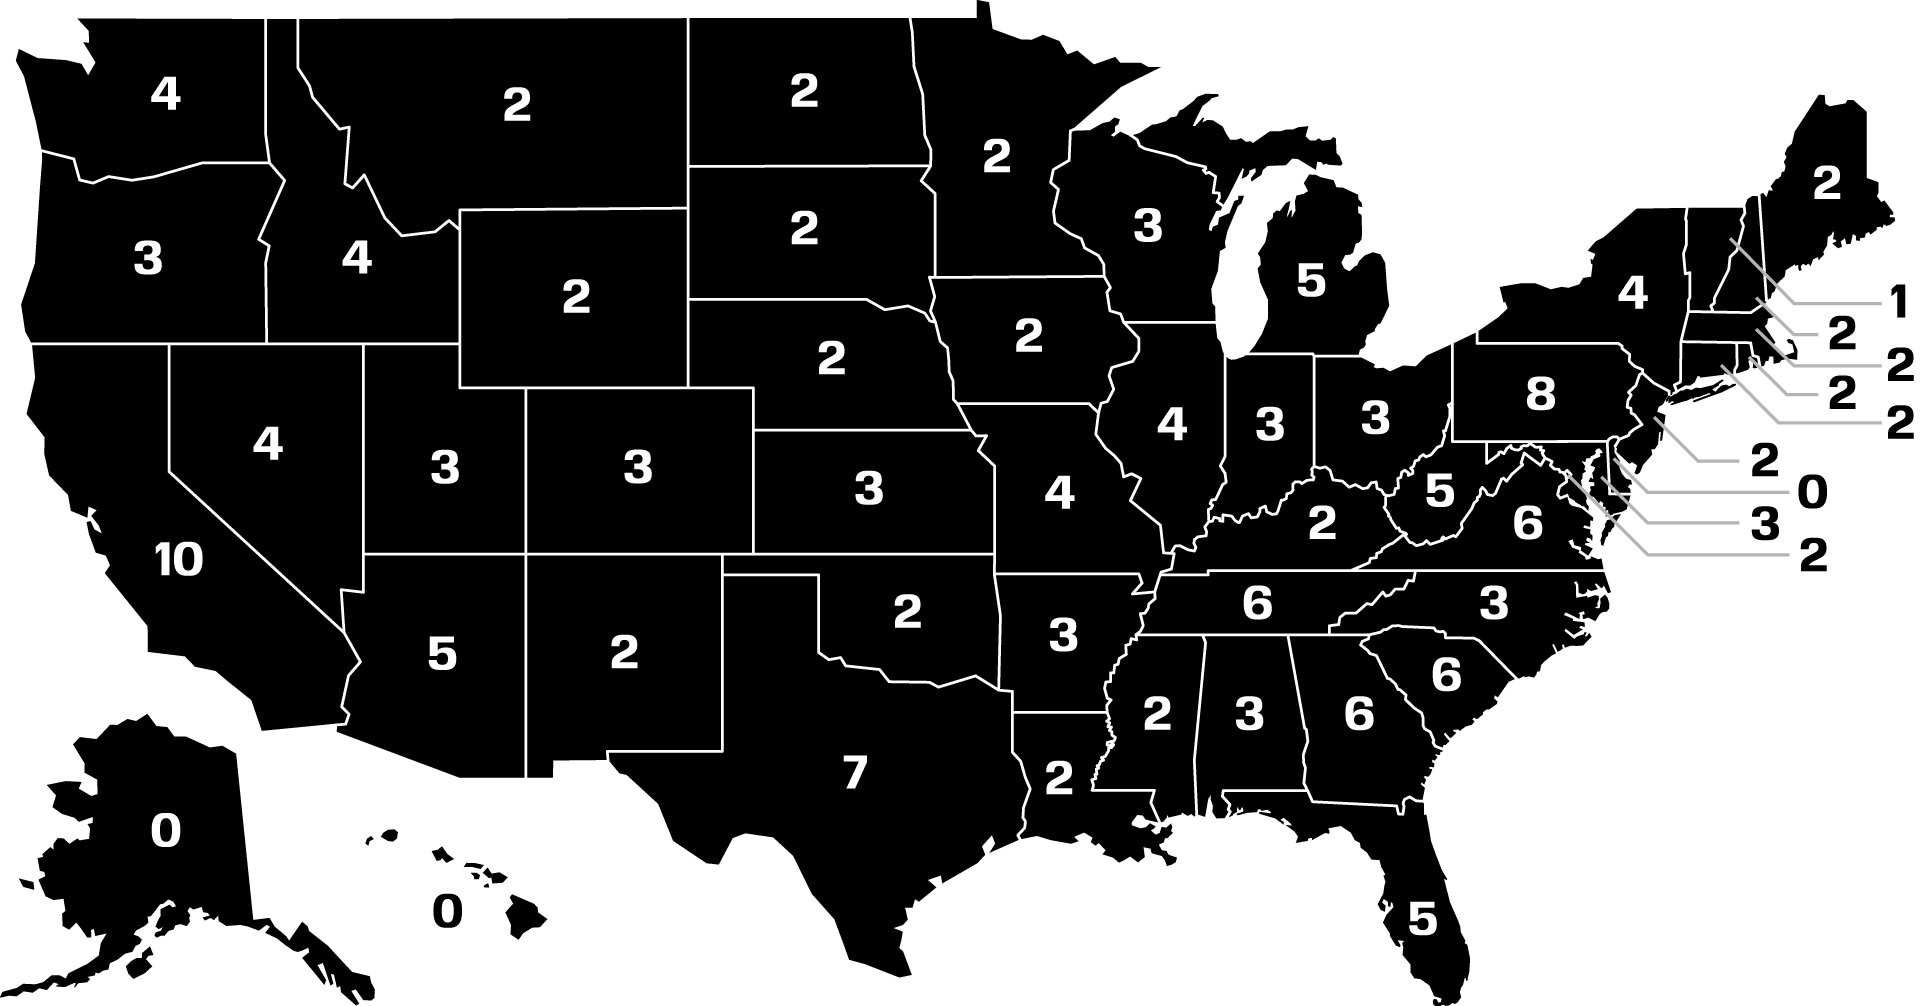 Outline map of US states with number of White Nationalist groups.